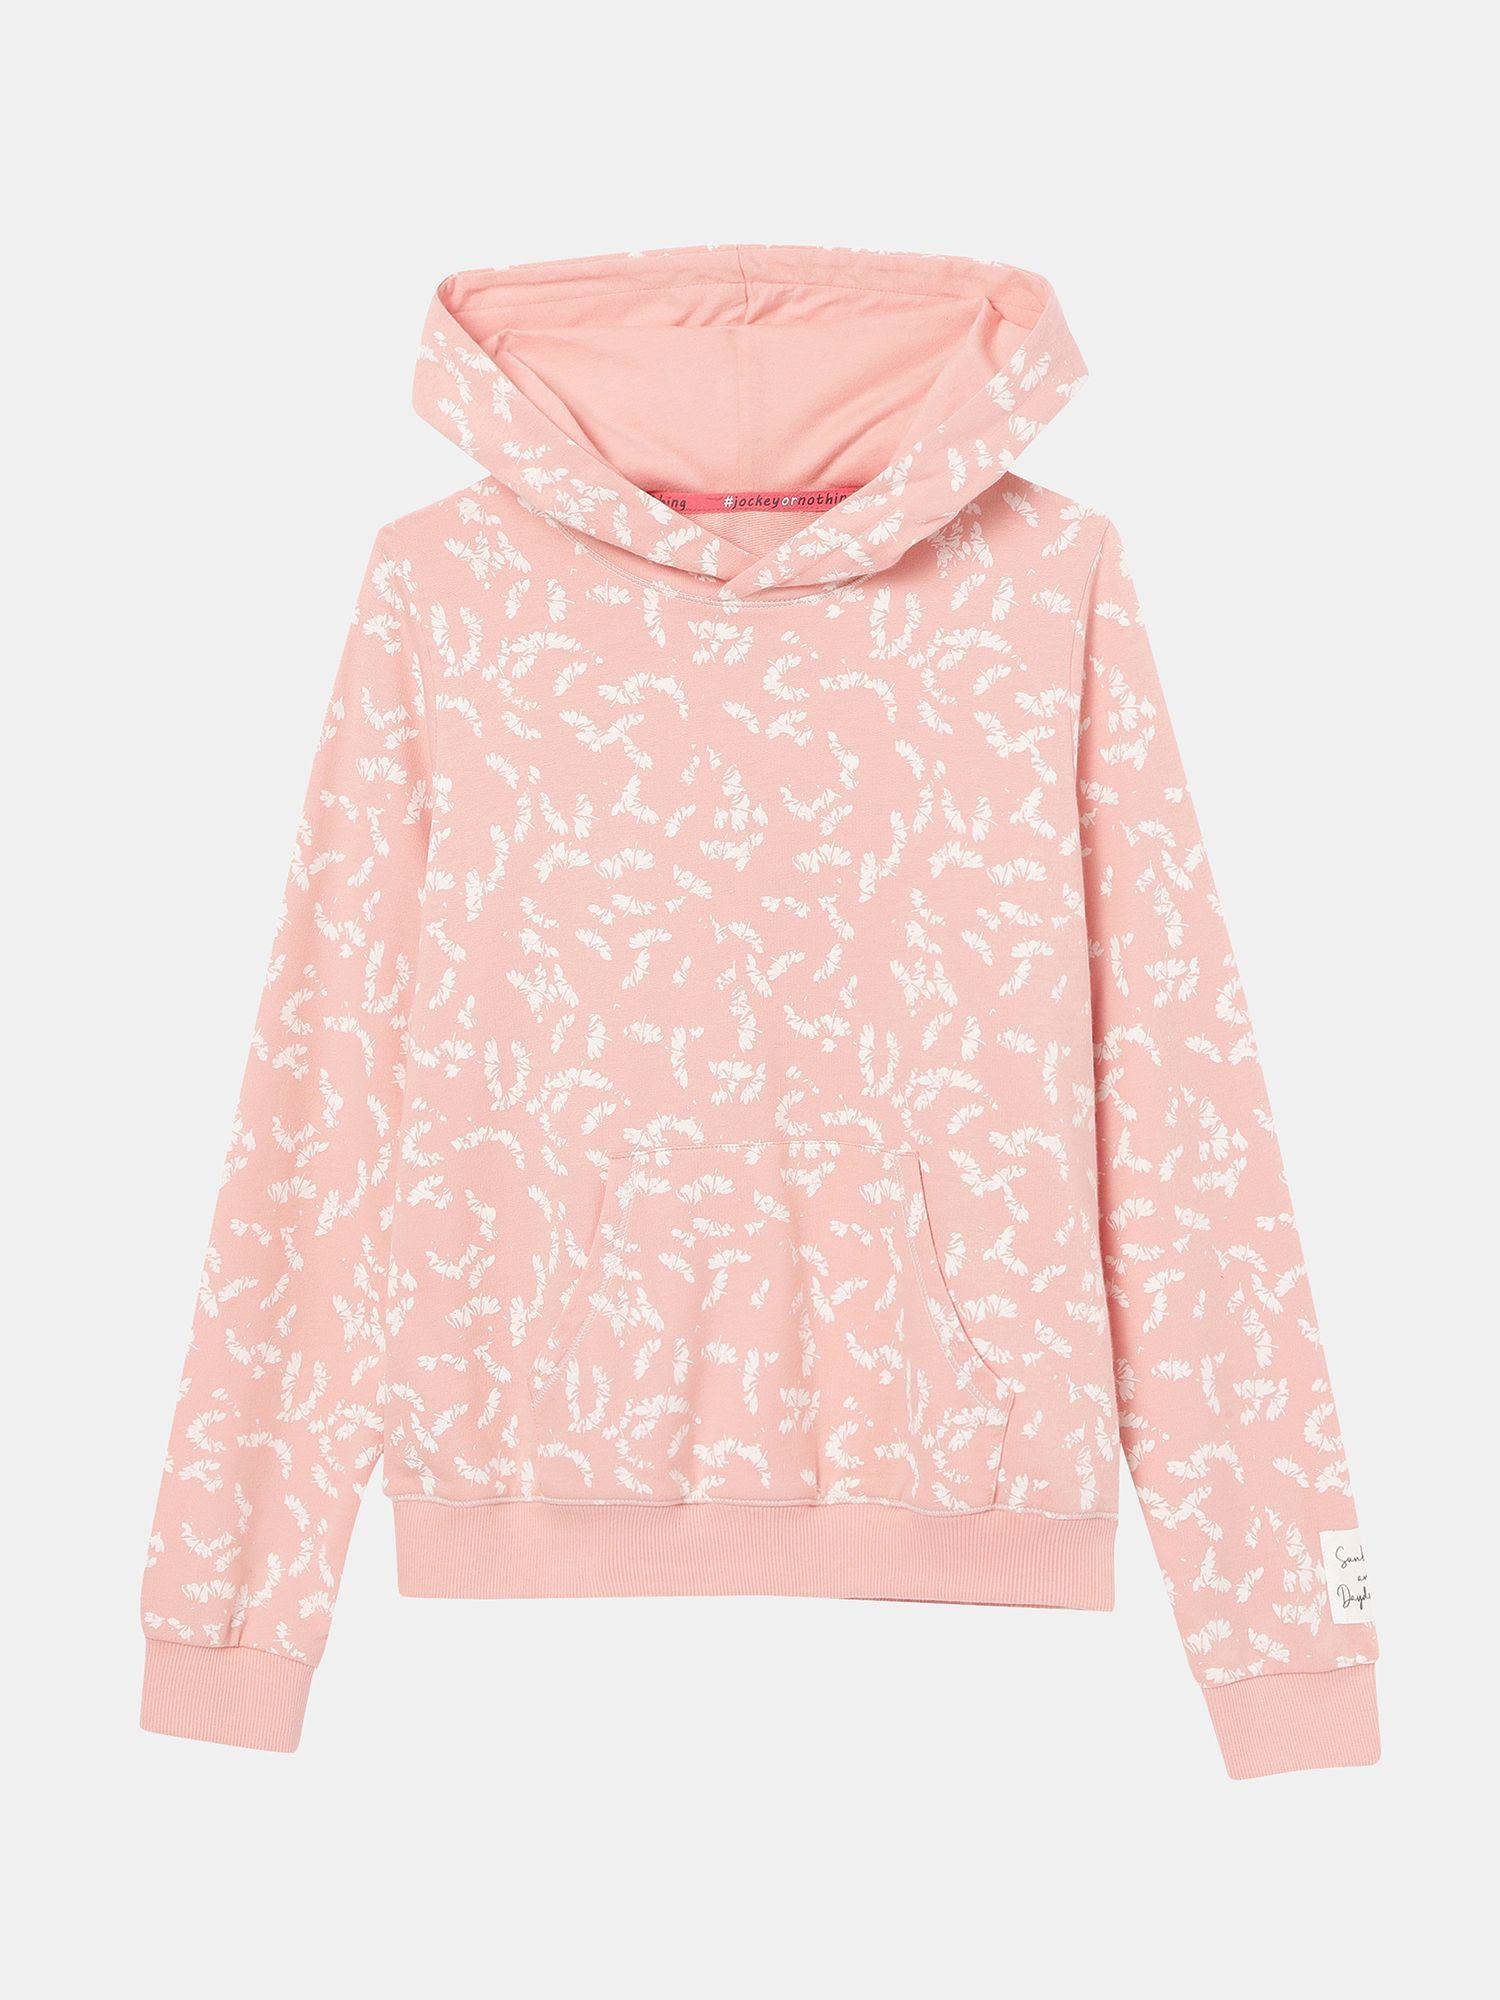 jockey cg26 cotton rich printed hoodie sweatshirt for girls with ribbed cuffs-multi-color